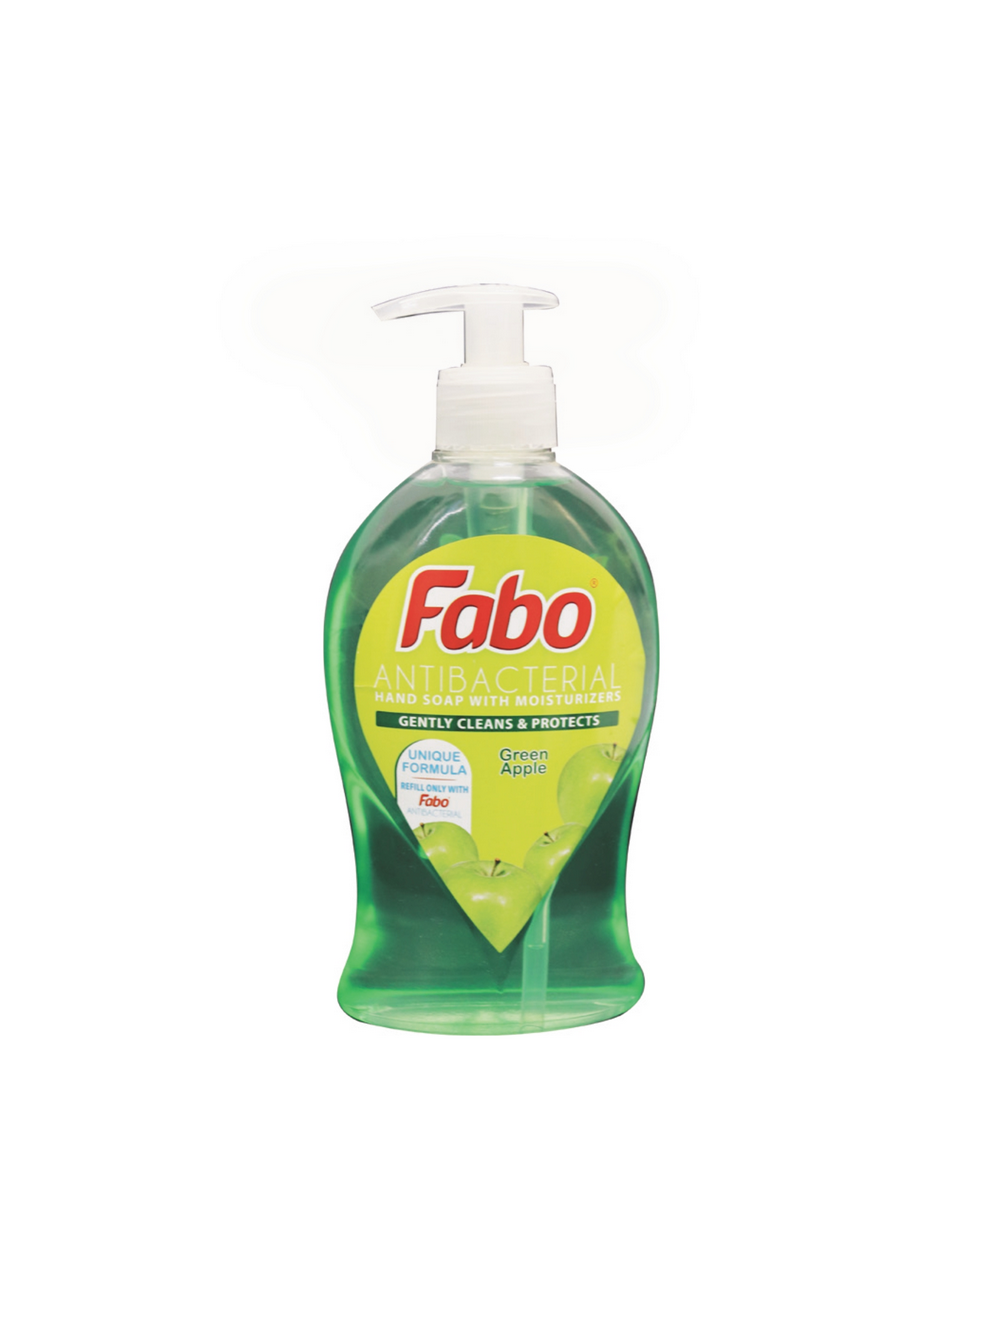 fabo-products_page-0085